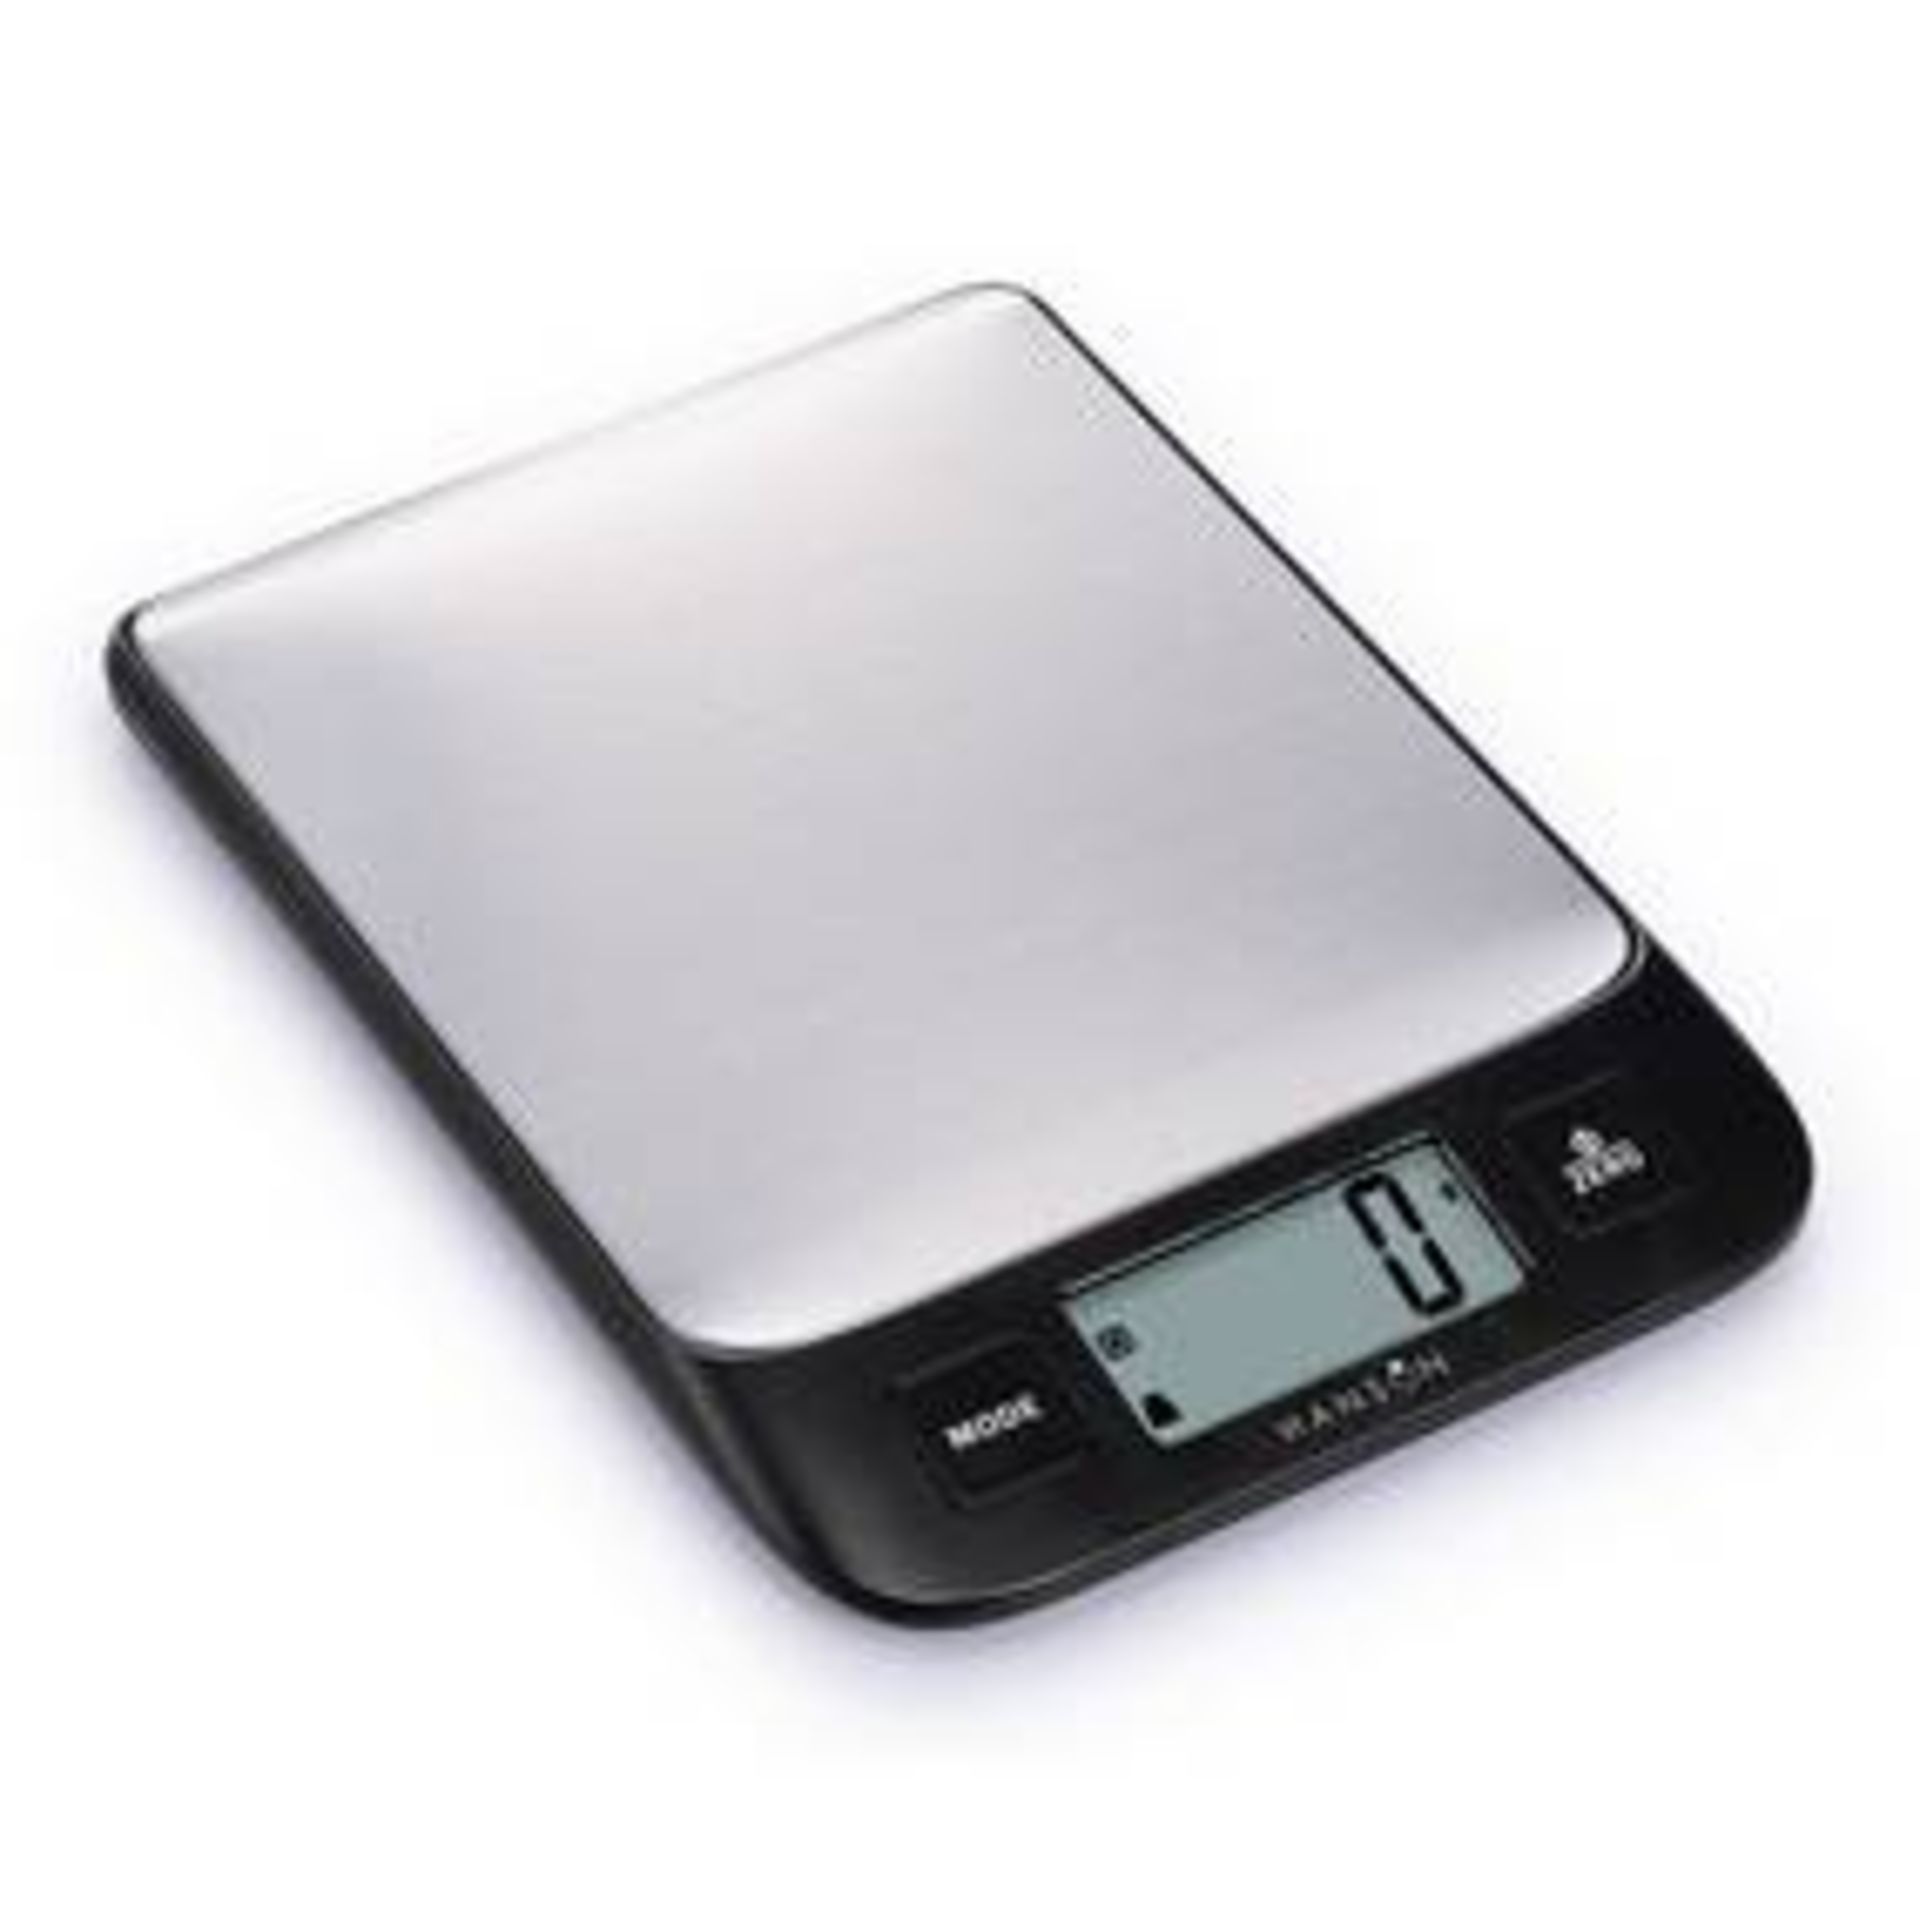 V Brand New Kitchen Collection Digital Kitchen Scales-Large LCD Display-Stainless Steel Weighing